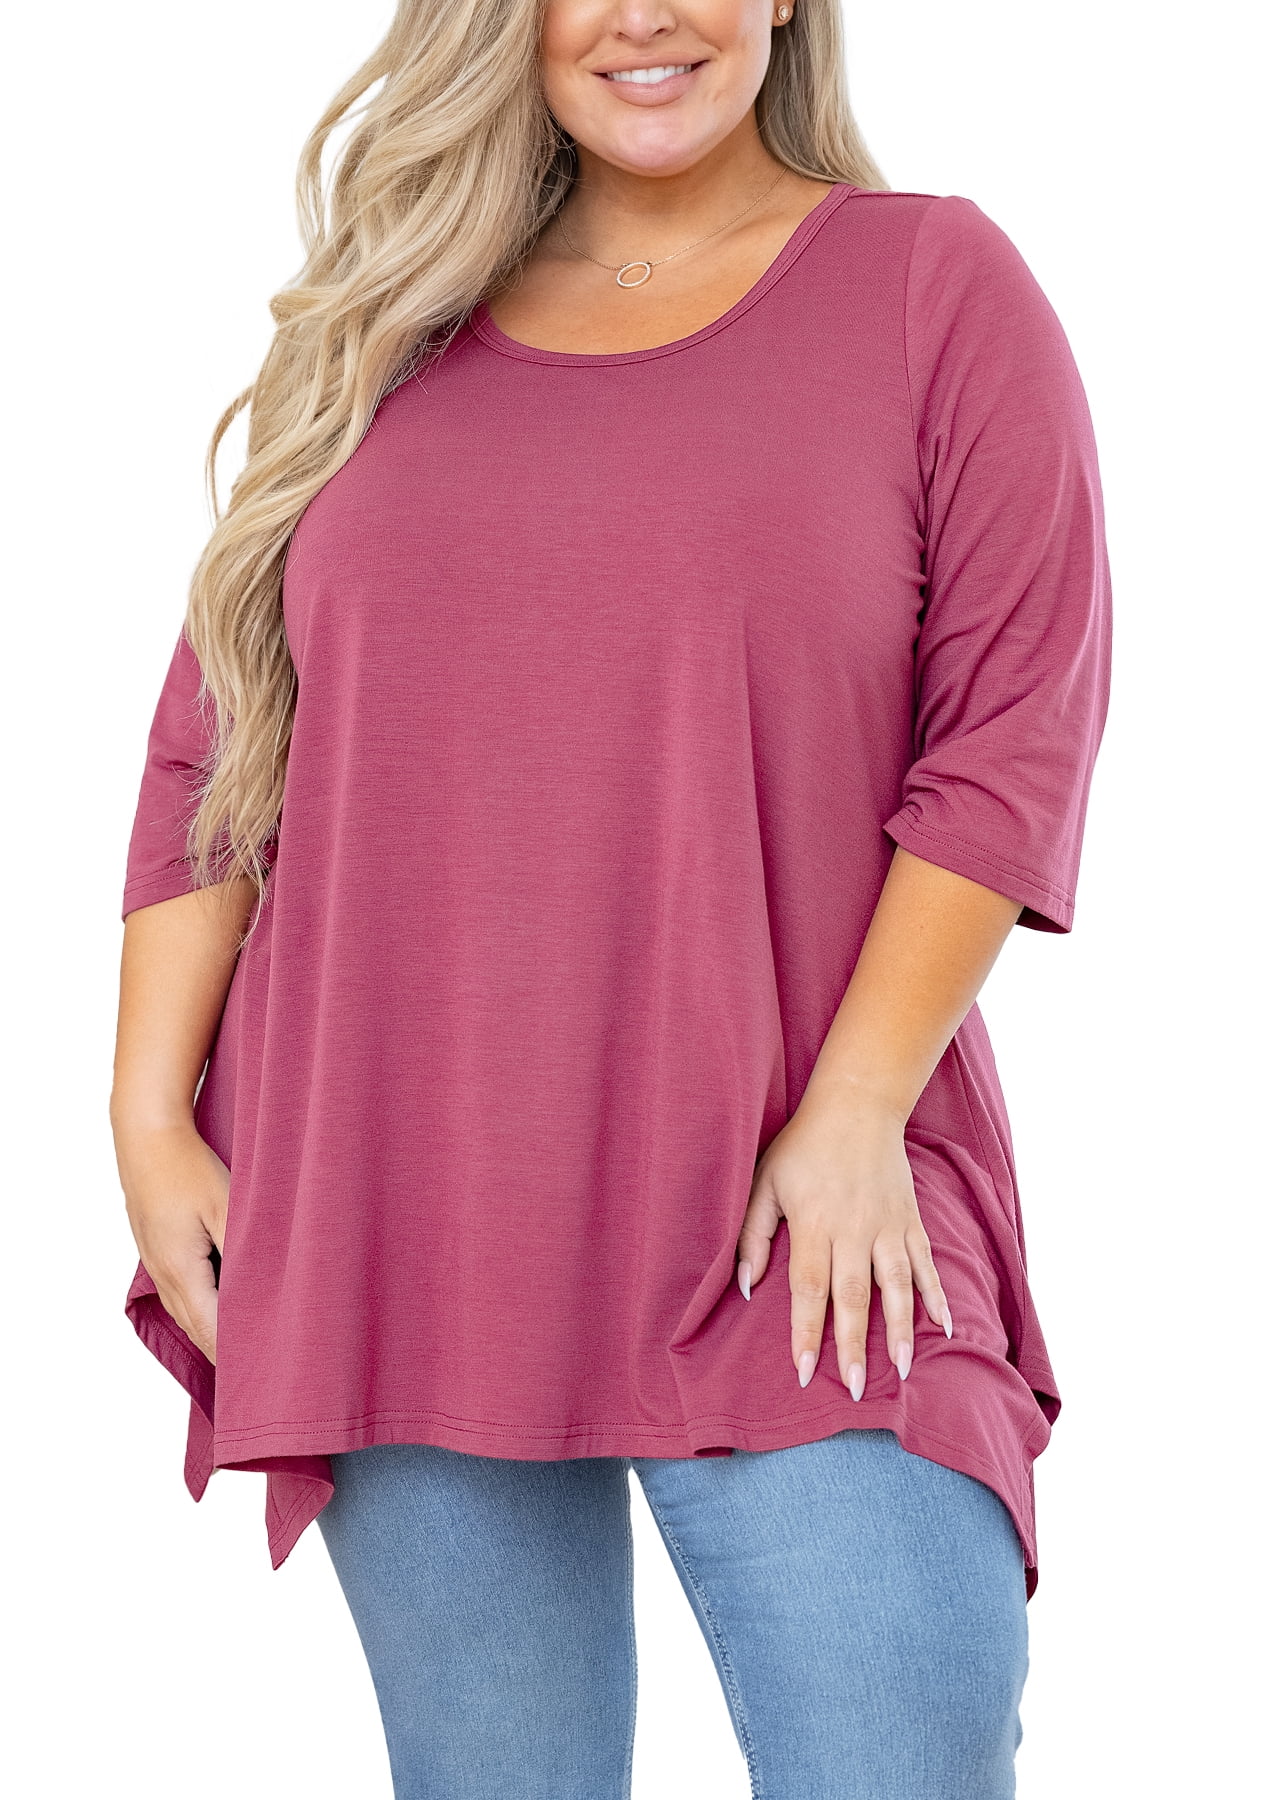 SHOWMALL Plus Size Women Top 3/4 Sleeve Clothes Purple Red 4X Blouse Swing  Tunic Crewneck Loose Clothing Shirt for Leggings 